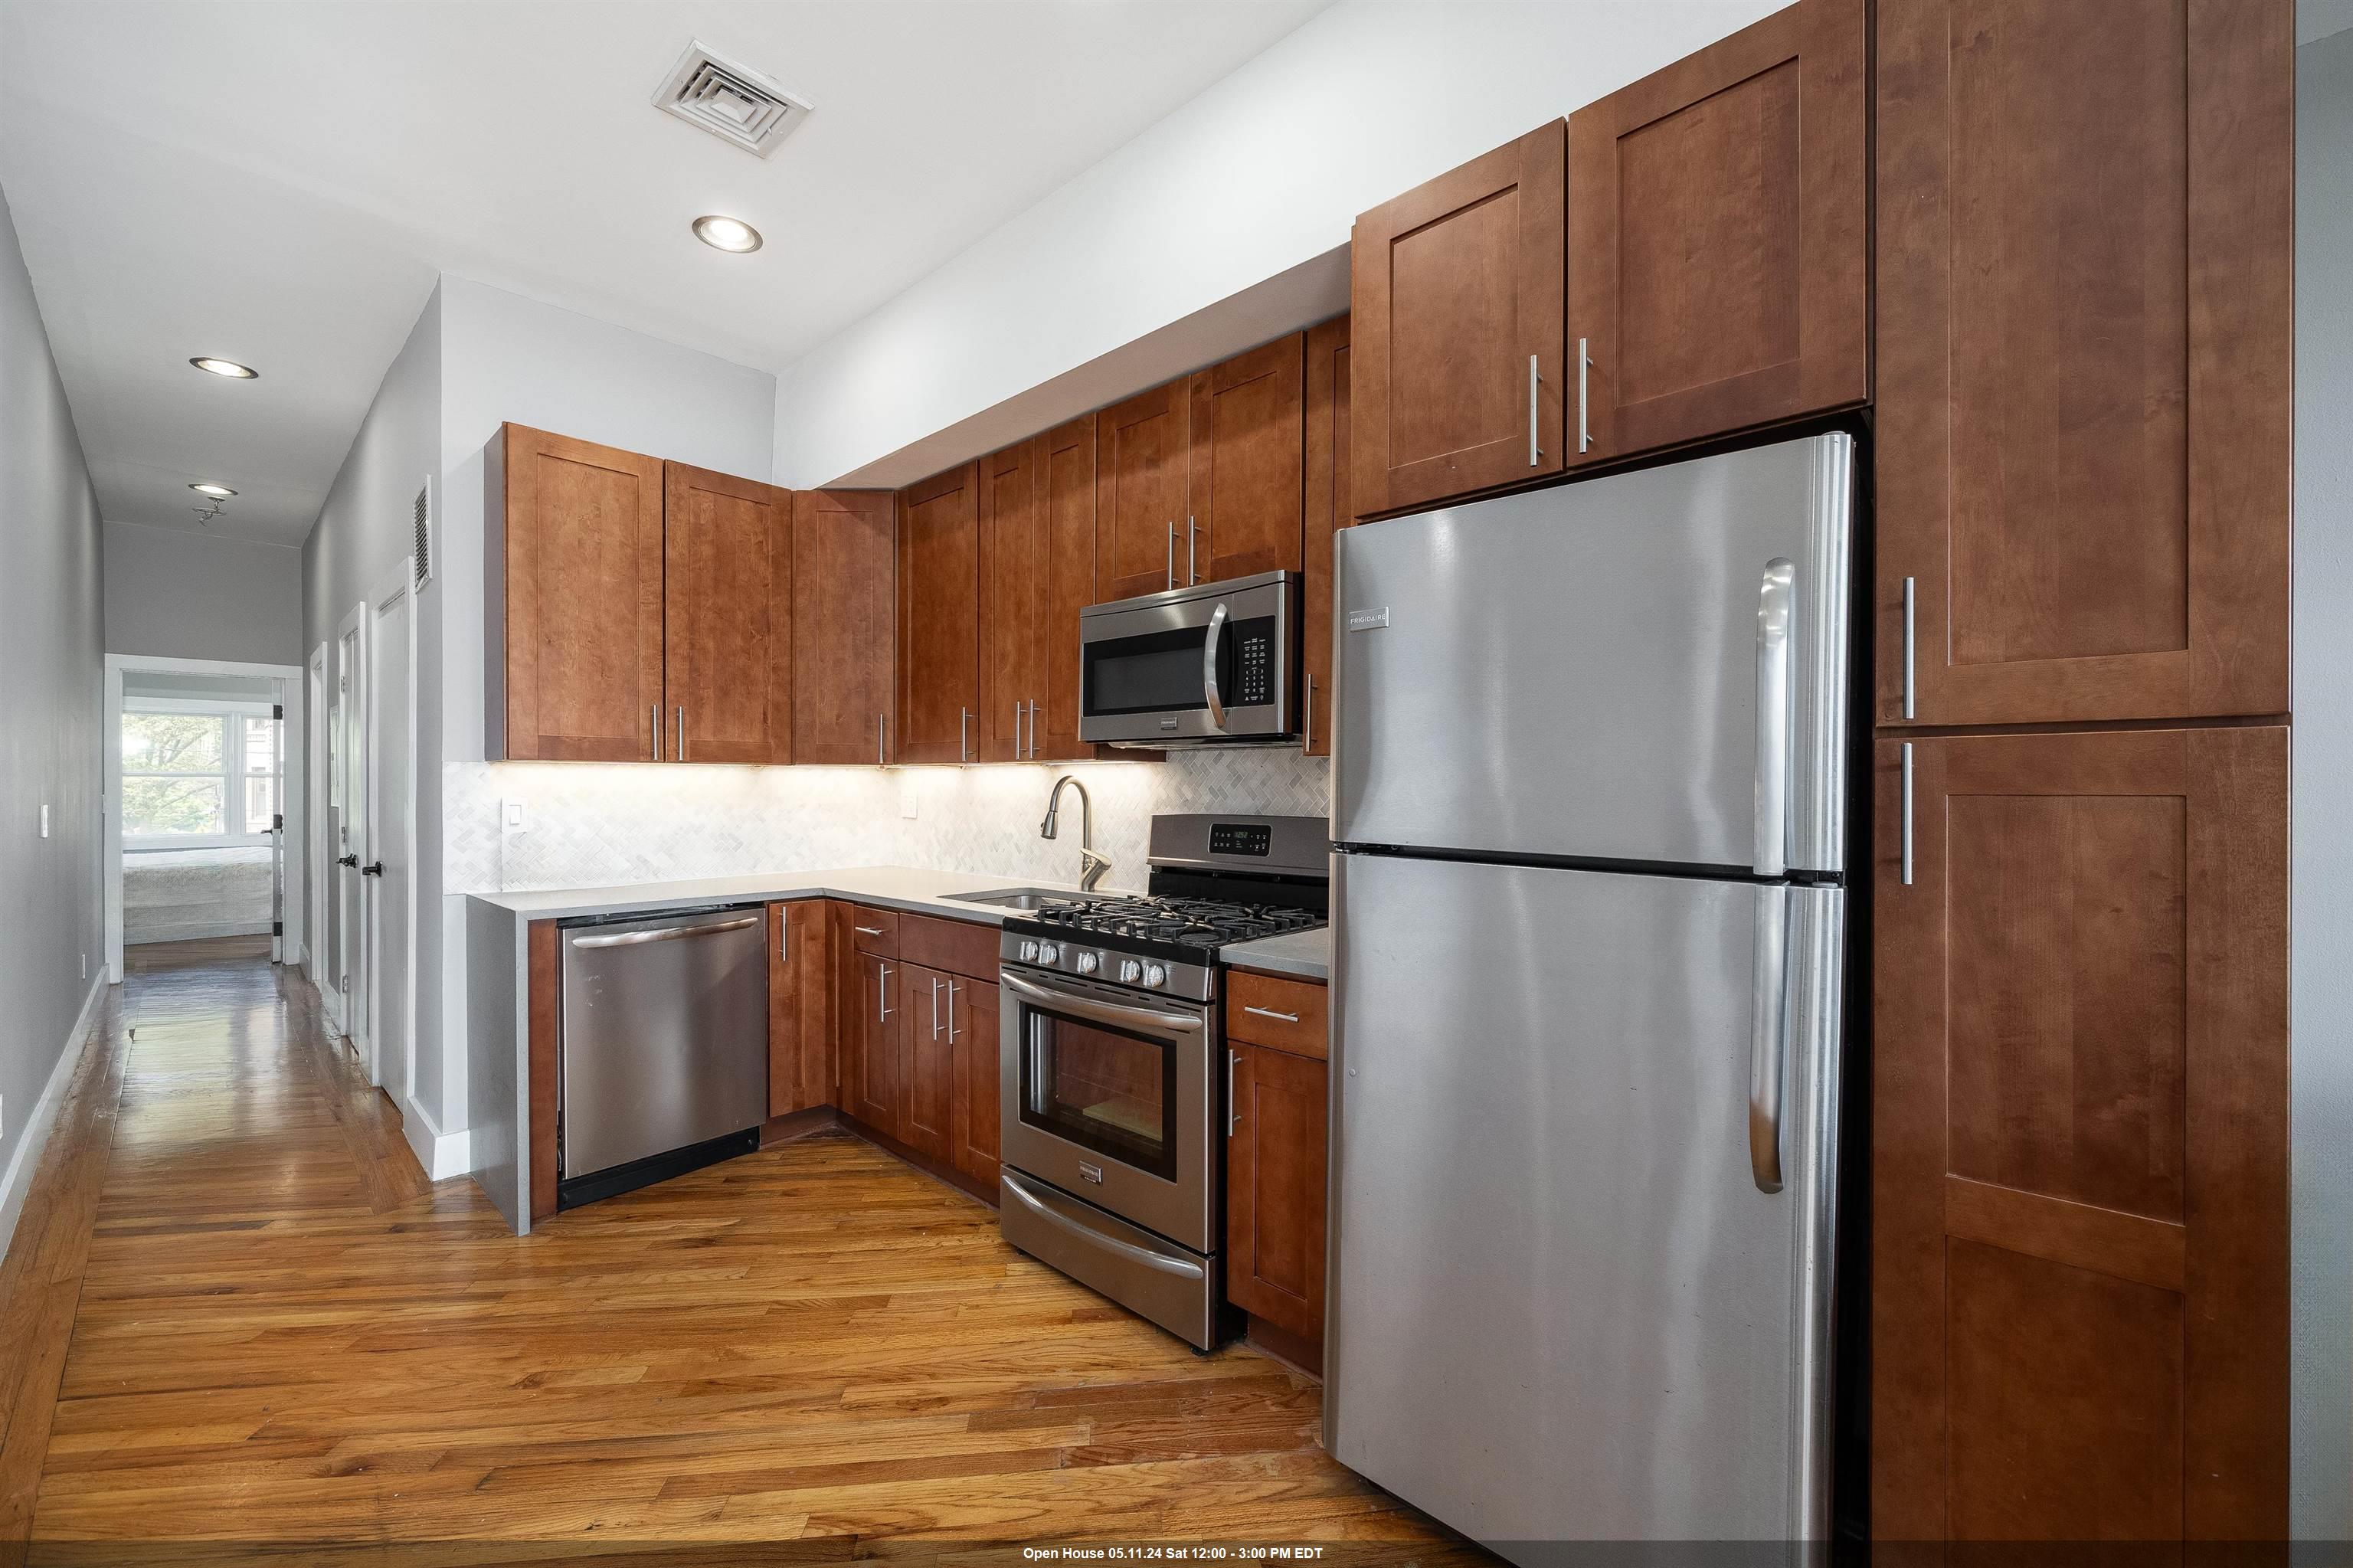 a kitchen with stainless steel appliances granite countertop a refrigerator microwave and stove